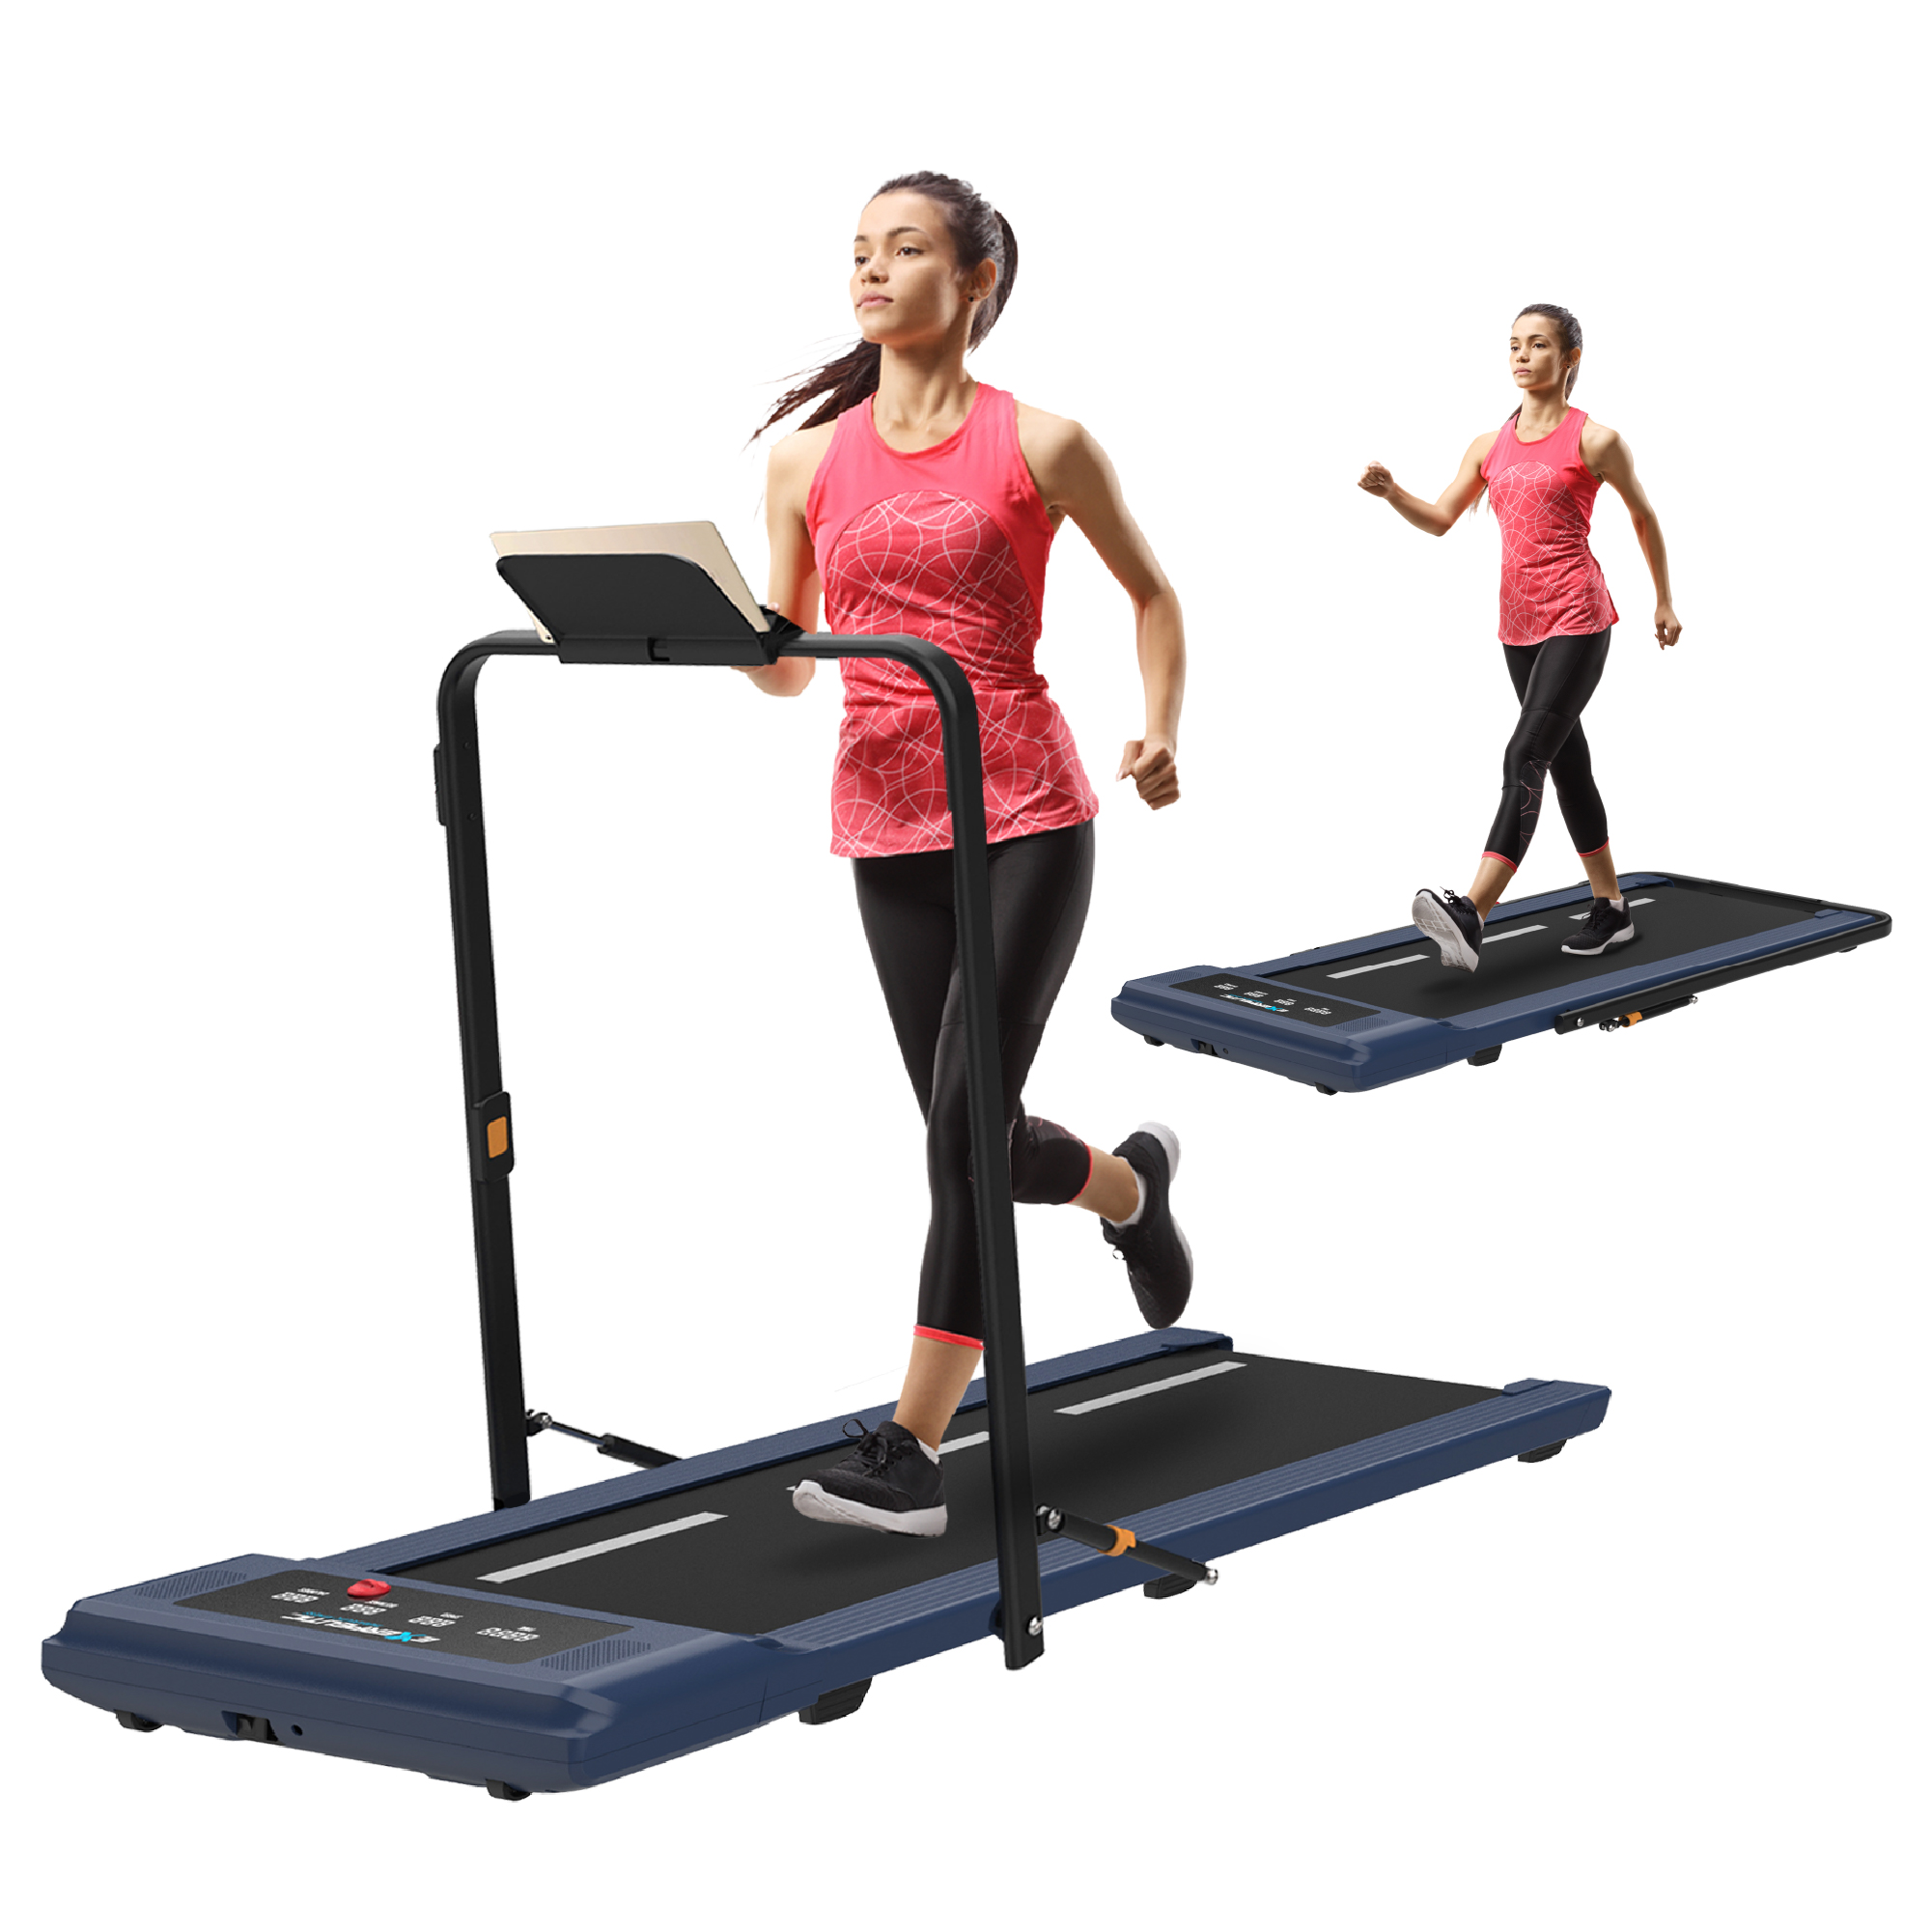 Exerpeutic TF1000 400 lbs. Weight Capacity Treadmill with Incline Options, Heavy Duty Belt and Pulse Monitoring - image 1 of 7